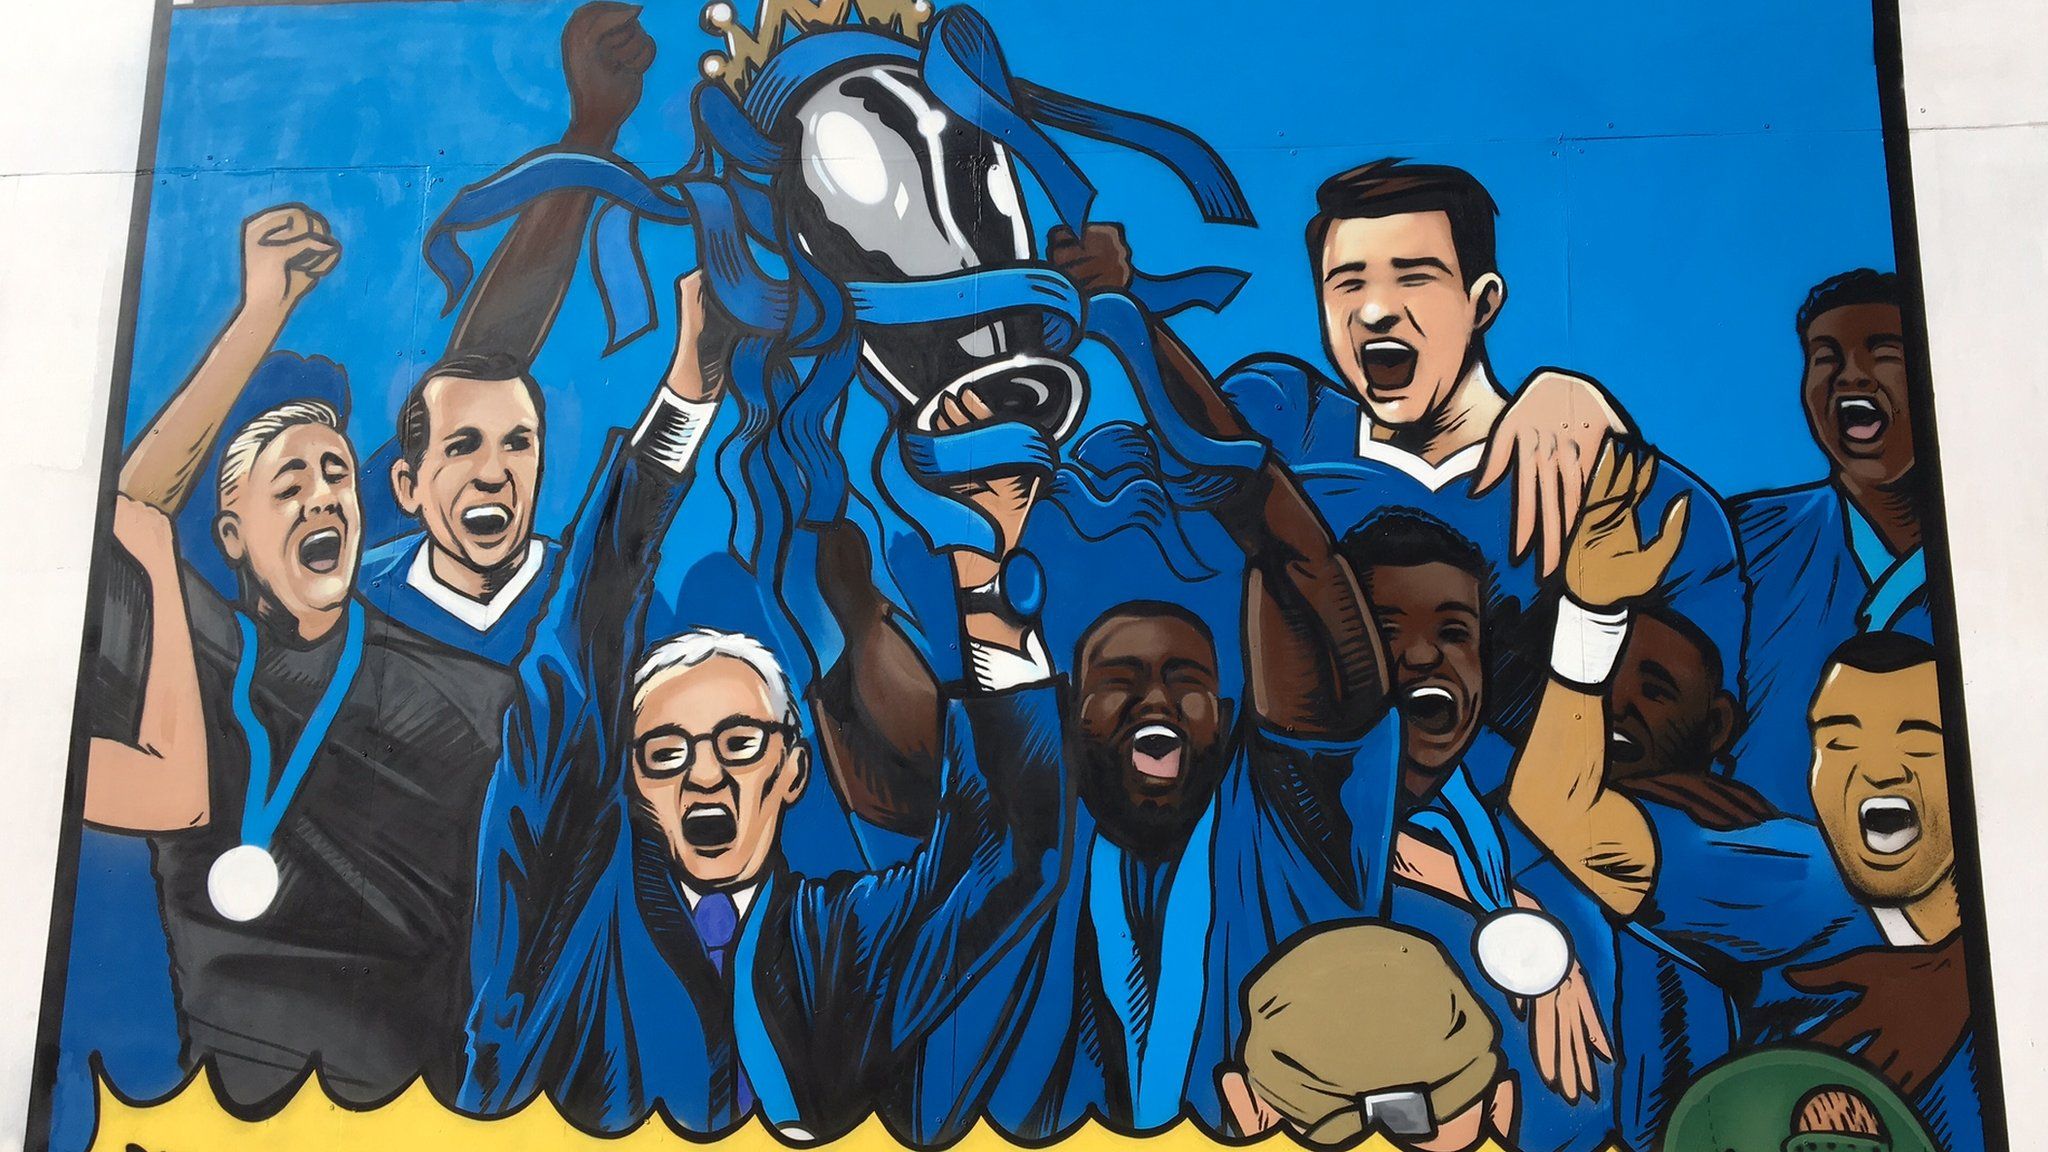 Leicester lifting the Premier League trophy in art form